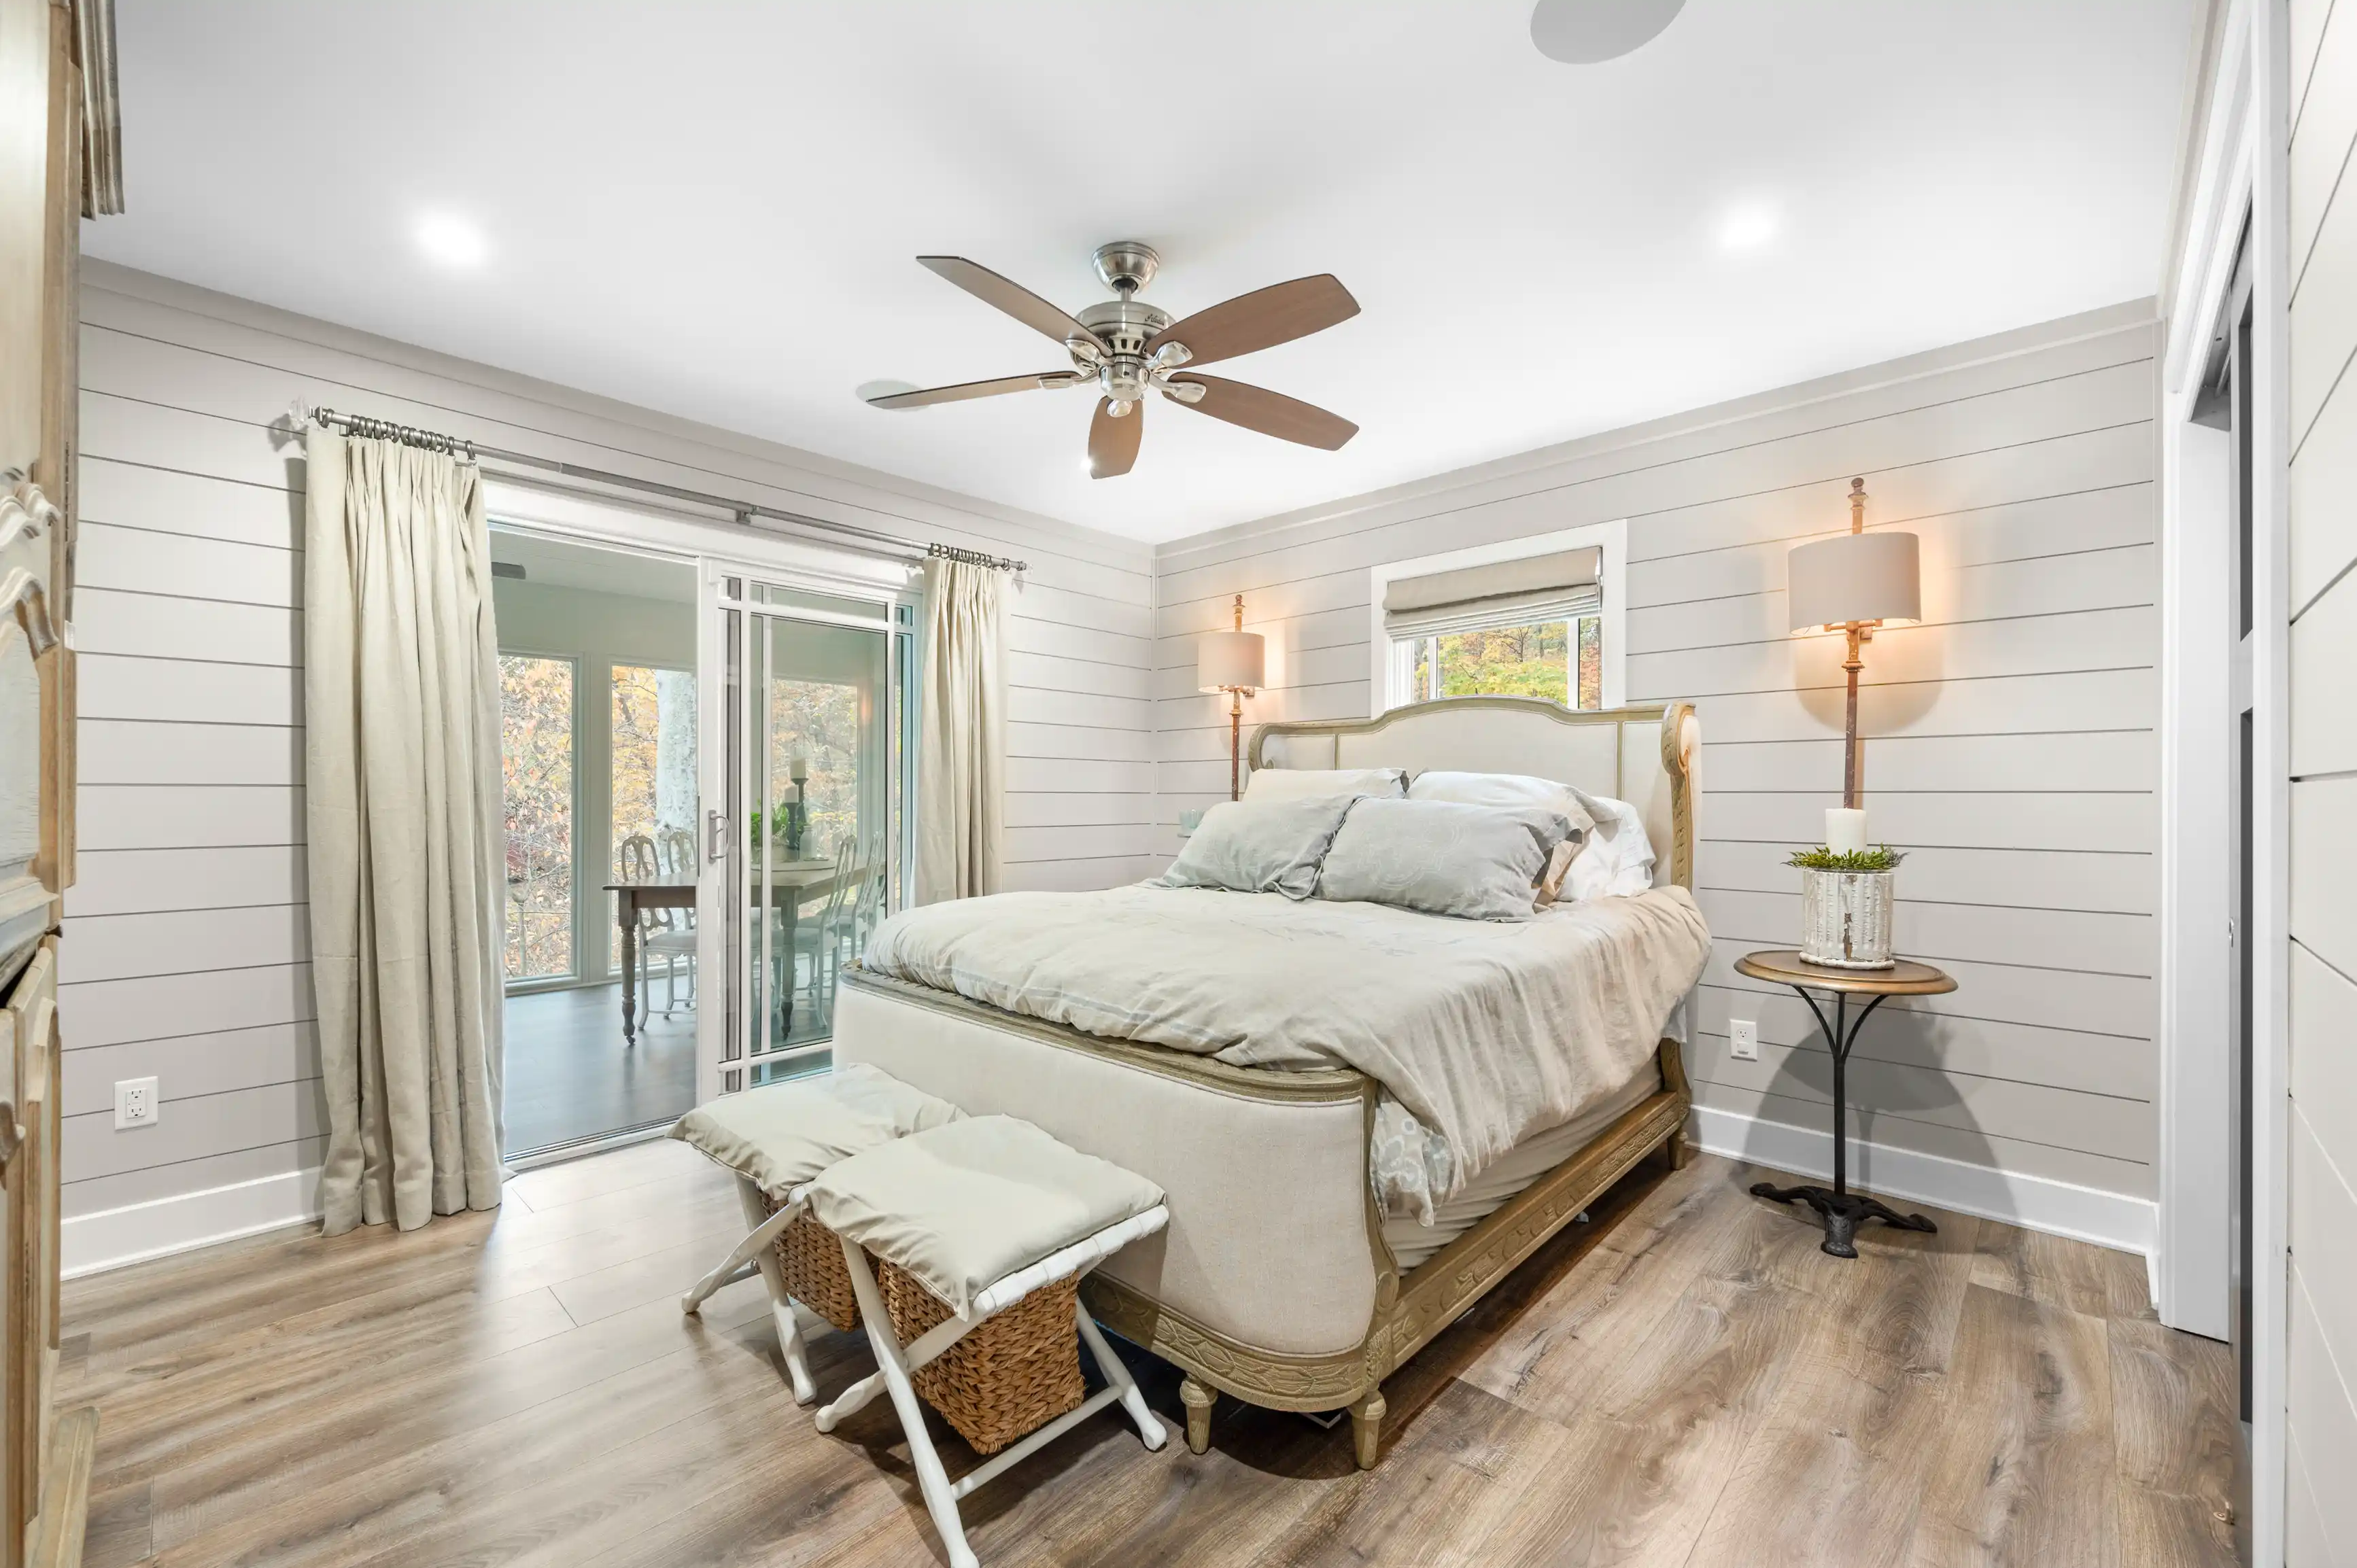 Bright and modern bedroom with a queen-sized bed, two bedside lamps, a ceiling fan, a folding chair with a cushion, sliding glass doors leading to an outdoor area, and shiplap walls.